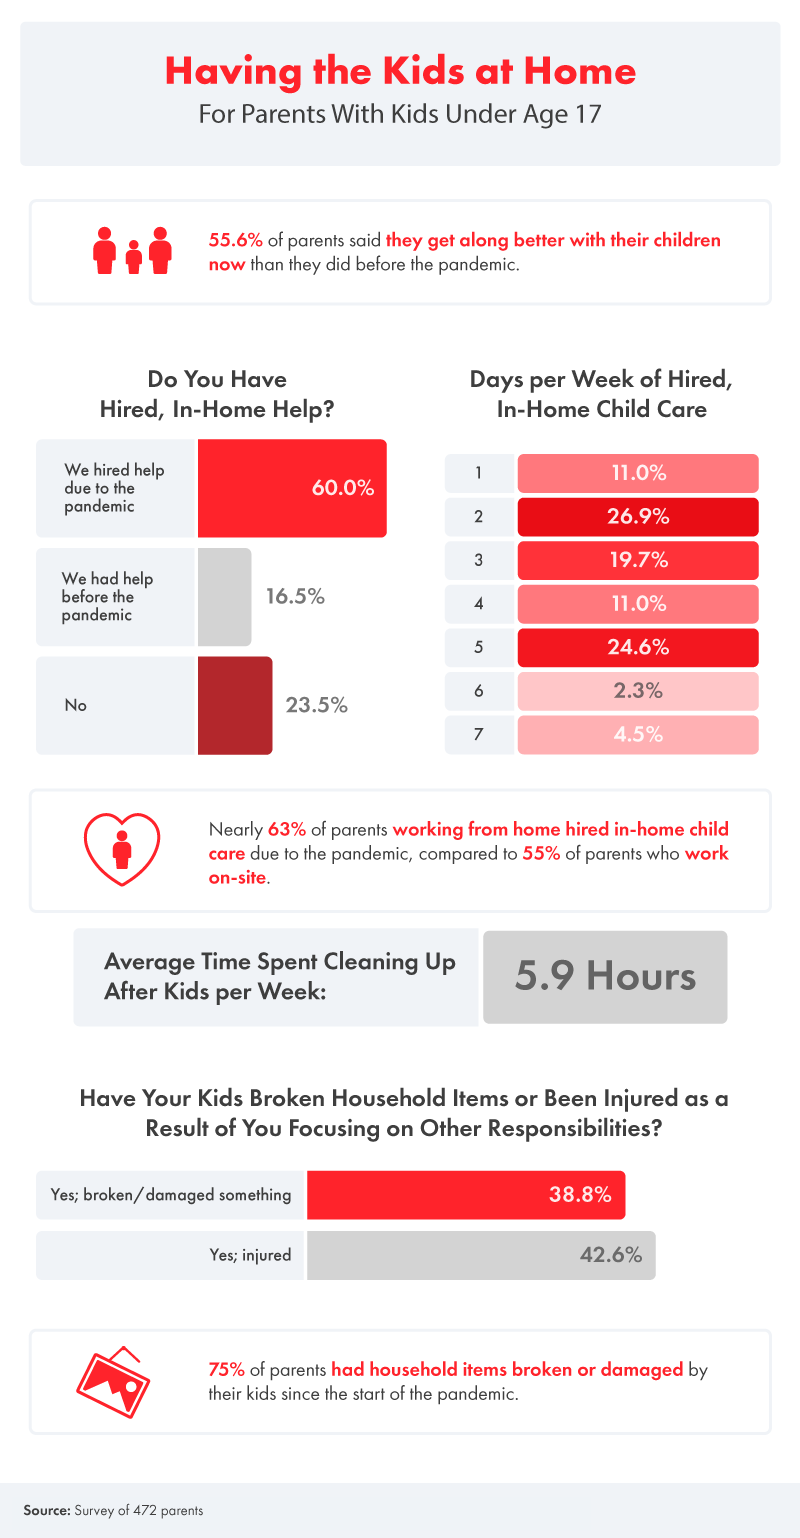 Having the Kids at Home infographic